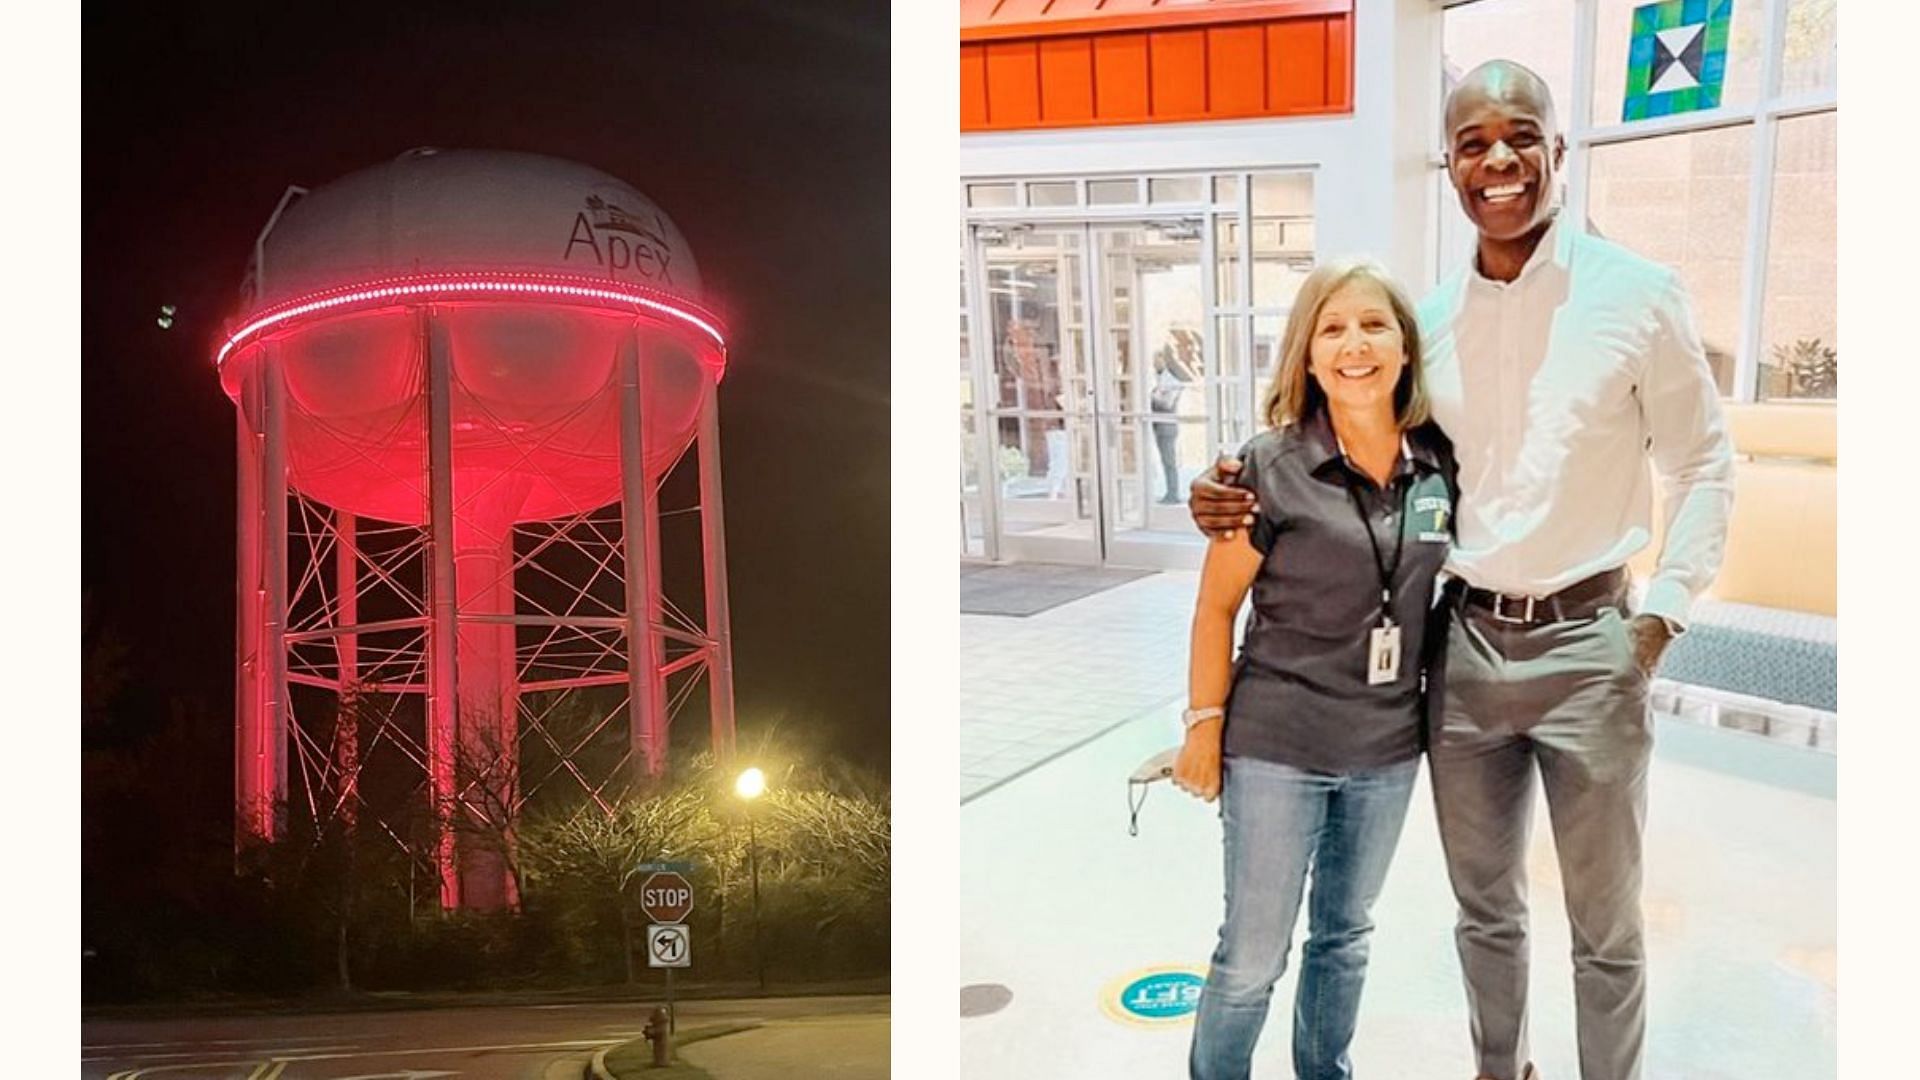 The Apex Water Tower lit Red in Tribute and Mayor Gilbert with Sinders (image via Twitter)